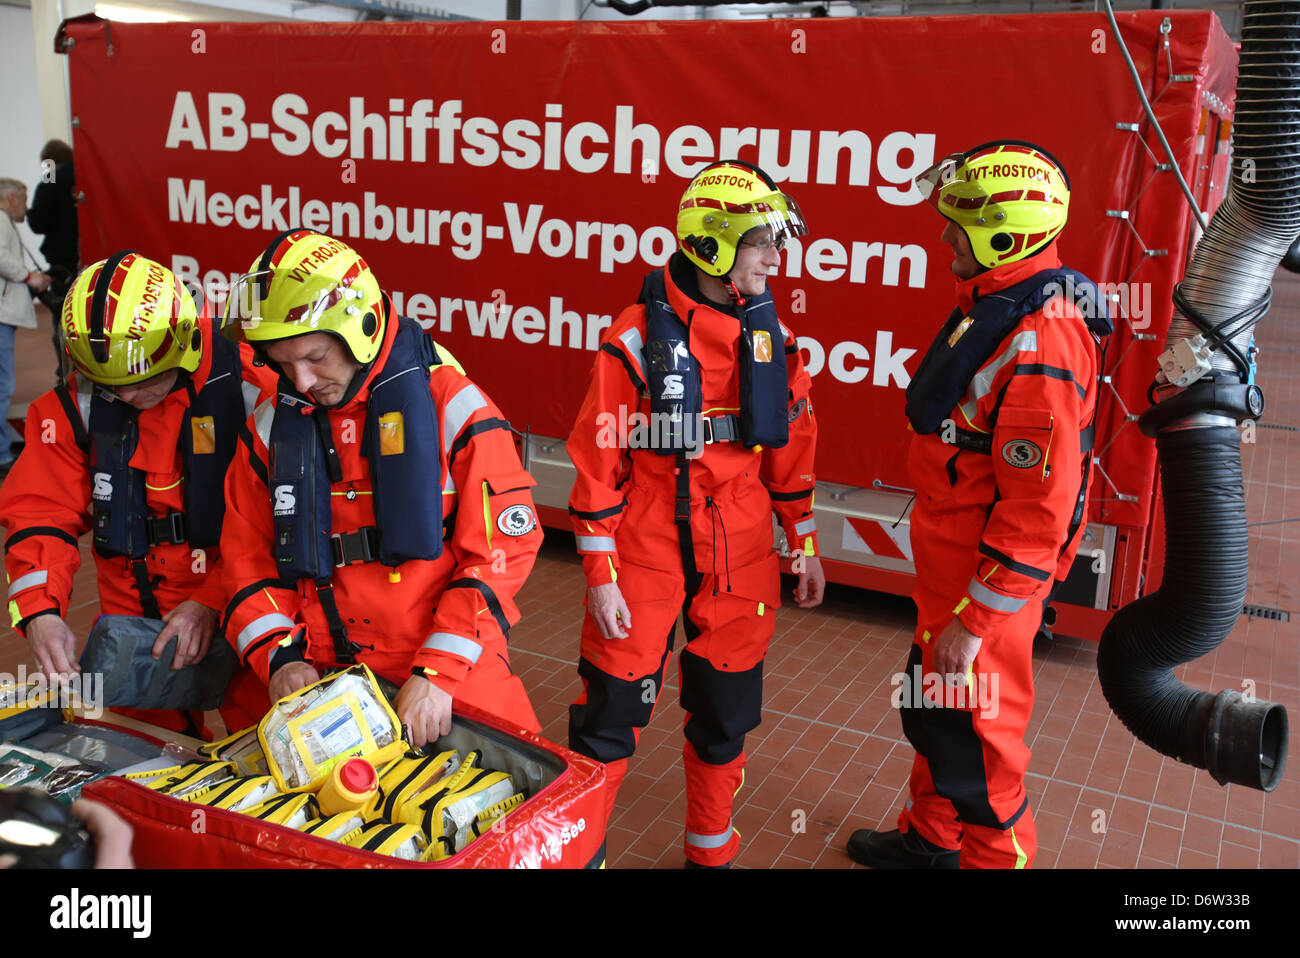 The future medical care team (VVT) of the Command for Maritime Emergencies (Havariekommando) if the fire department is introduced in Rostock, Germany, 23 April 2013. The team (L-R) paramedic Marcel Przybyla, doctor Martin Gloger, doctor Svend Kamysek, doctor Goetz Klaunick will officially start work on 01 May 2013. The VVT is one of ten team of the Havariekommandos along the German coast. The provide emergency medical care during serious ship accidents. Photo: Bernd Wuestneck Stock Photo